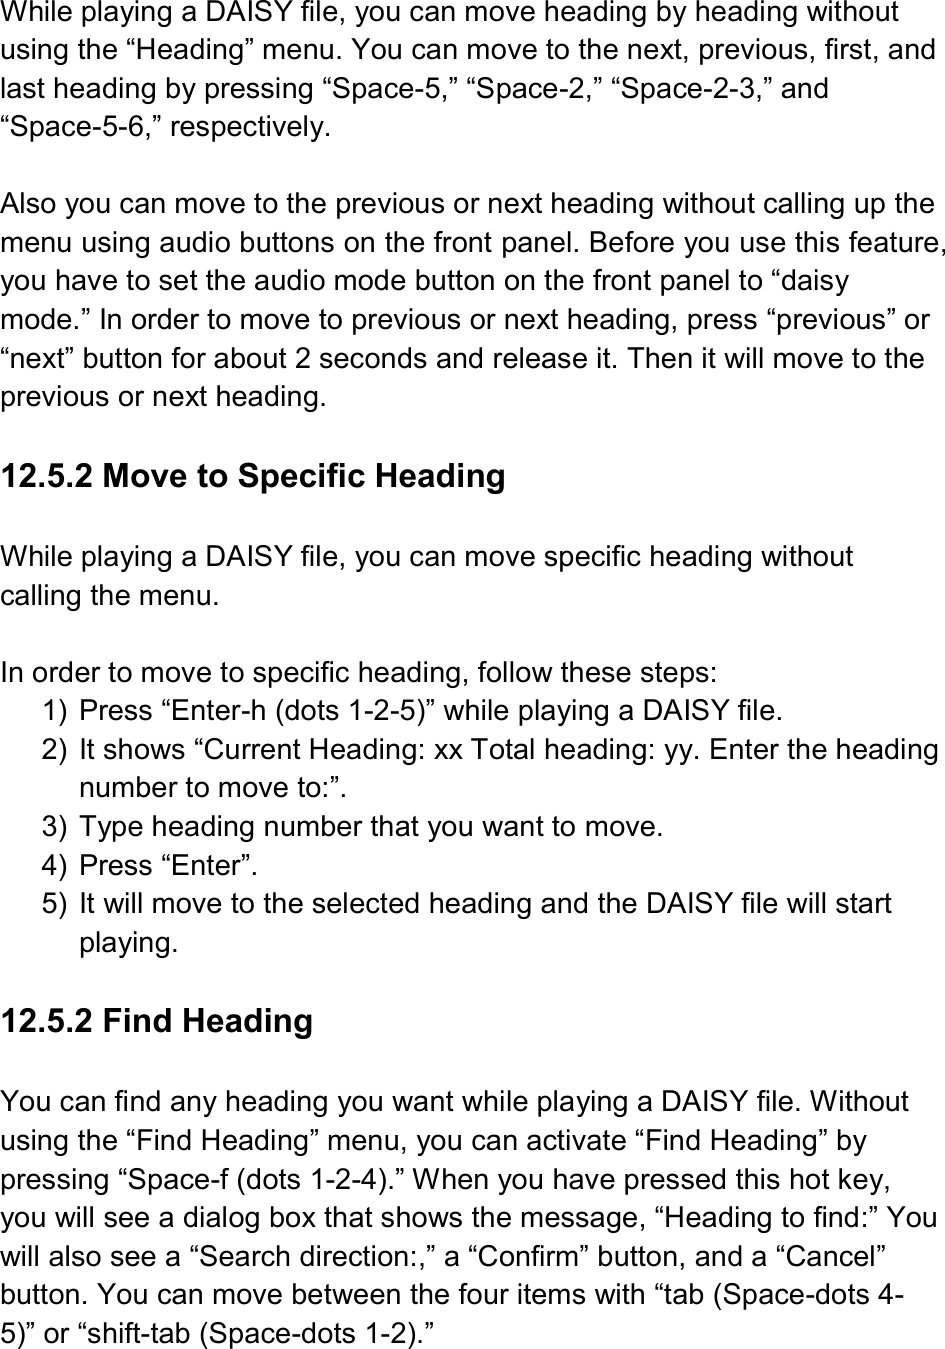   While playing a DAISY file, you can move heading by heading without using the “Heading” menu. You can move to the next, previous, first, and last heading by pressing “Space-5,” “Space-2,” “Space-2-3,” and “Space-5-6,” respectively.  Also you can move to the previous or next heading without calling up the menu using audio buttons on the front panel. Before you use this feature, you have to set the audio mode button on the front panel to “daisy mode.” In order to move to previous or next heading, press “previous” or “next” button for about 2 seconds and release it. Then it will move to the previous or next heading.  12.5.2 Move to Specific Heading  While playing a DAISY file, you can move specific heading without calling the menu.  In order to move to specific heading, follow these steps: 1)  Press “Enter-h (dots 1-2-5)” while playing a DAISY file. 2)  It shows “Current Heading: xx Total heading: yy. Enter the heading number to move to:”. 3)  Type heading number that you want to move. 4)  Press “Enter”. 5)  It will move to the selected heading and the DAISY file will start playing.  12.5.2 Find Heading  You can find any heading you want while playing a DAISY file. Without using the “Find Heading” menu, you can activate “Find Heading” by pressing “Space-f (dots 1-2-4).” When you have pressed this hot key, you will see a dialog box that shows the message, “Heading to find:” You will also see a “Search direction:,” a “Confirm” button, and a “Cancel” button. You can move between the four items with “tab (Space-dots 4-5)” or “shift-tab (Space-dots 1-2).” 